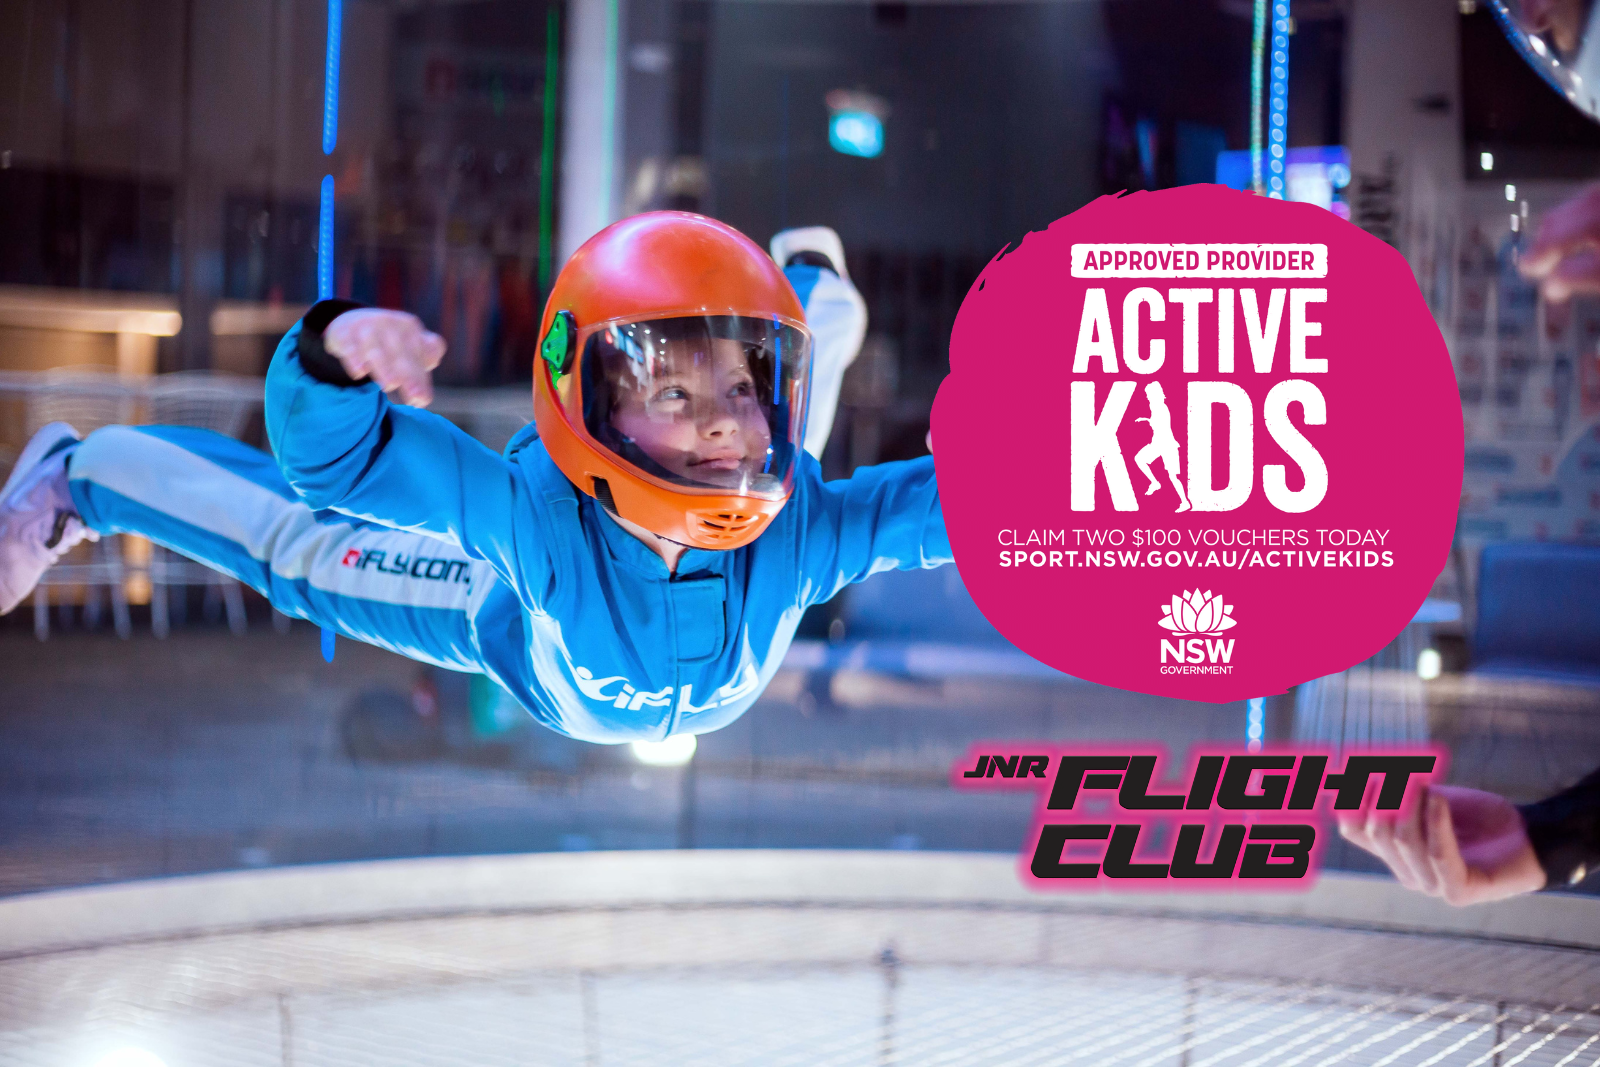 Active Kids Vouchers at iFLY Downunder